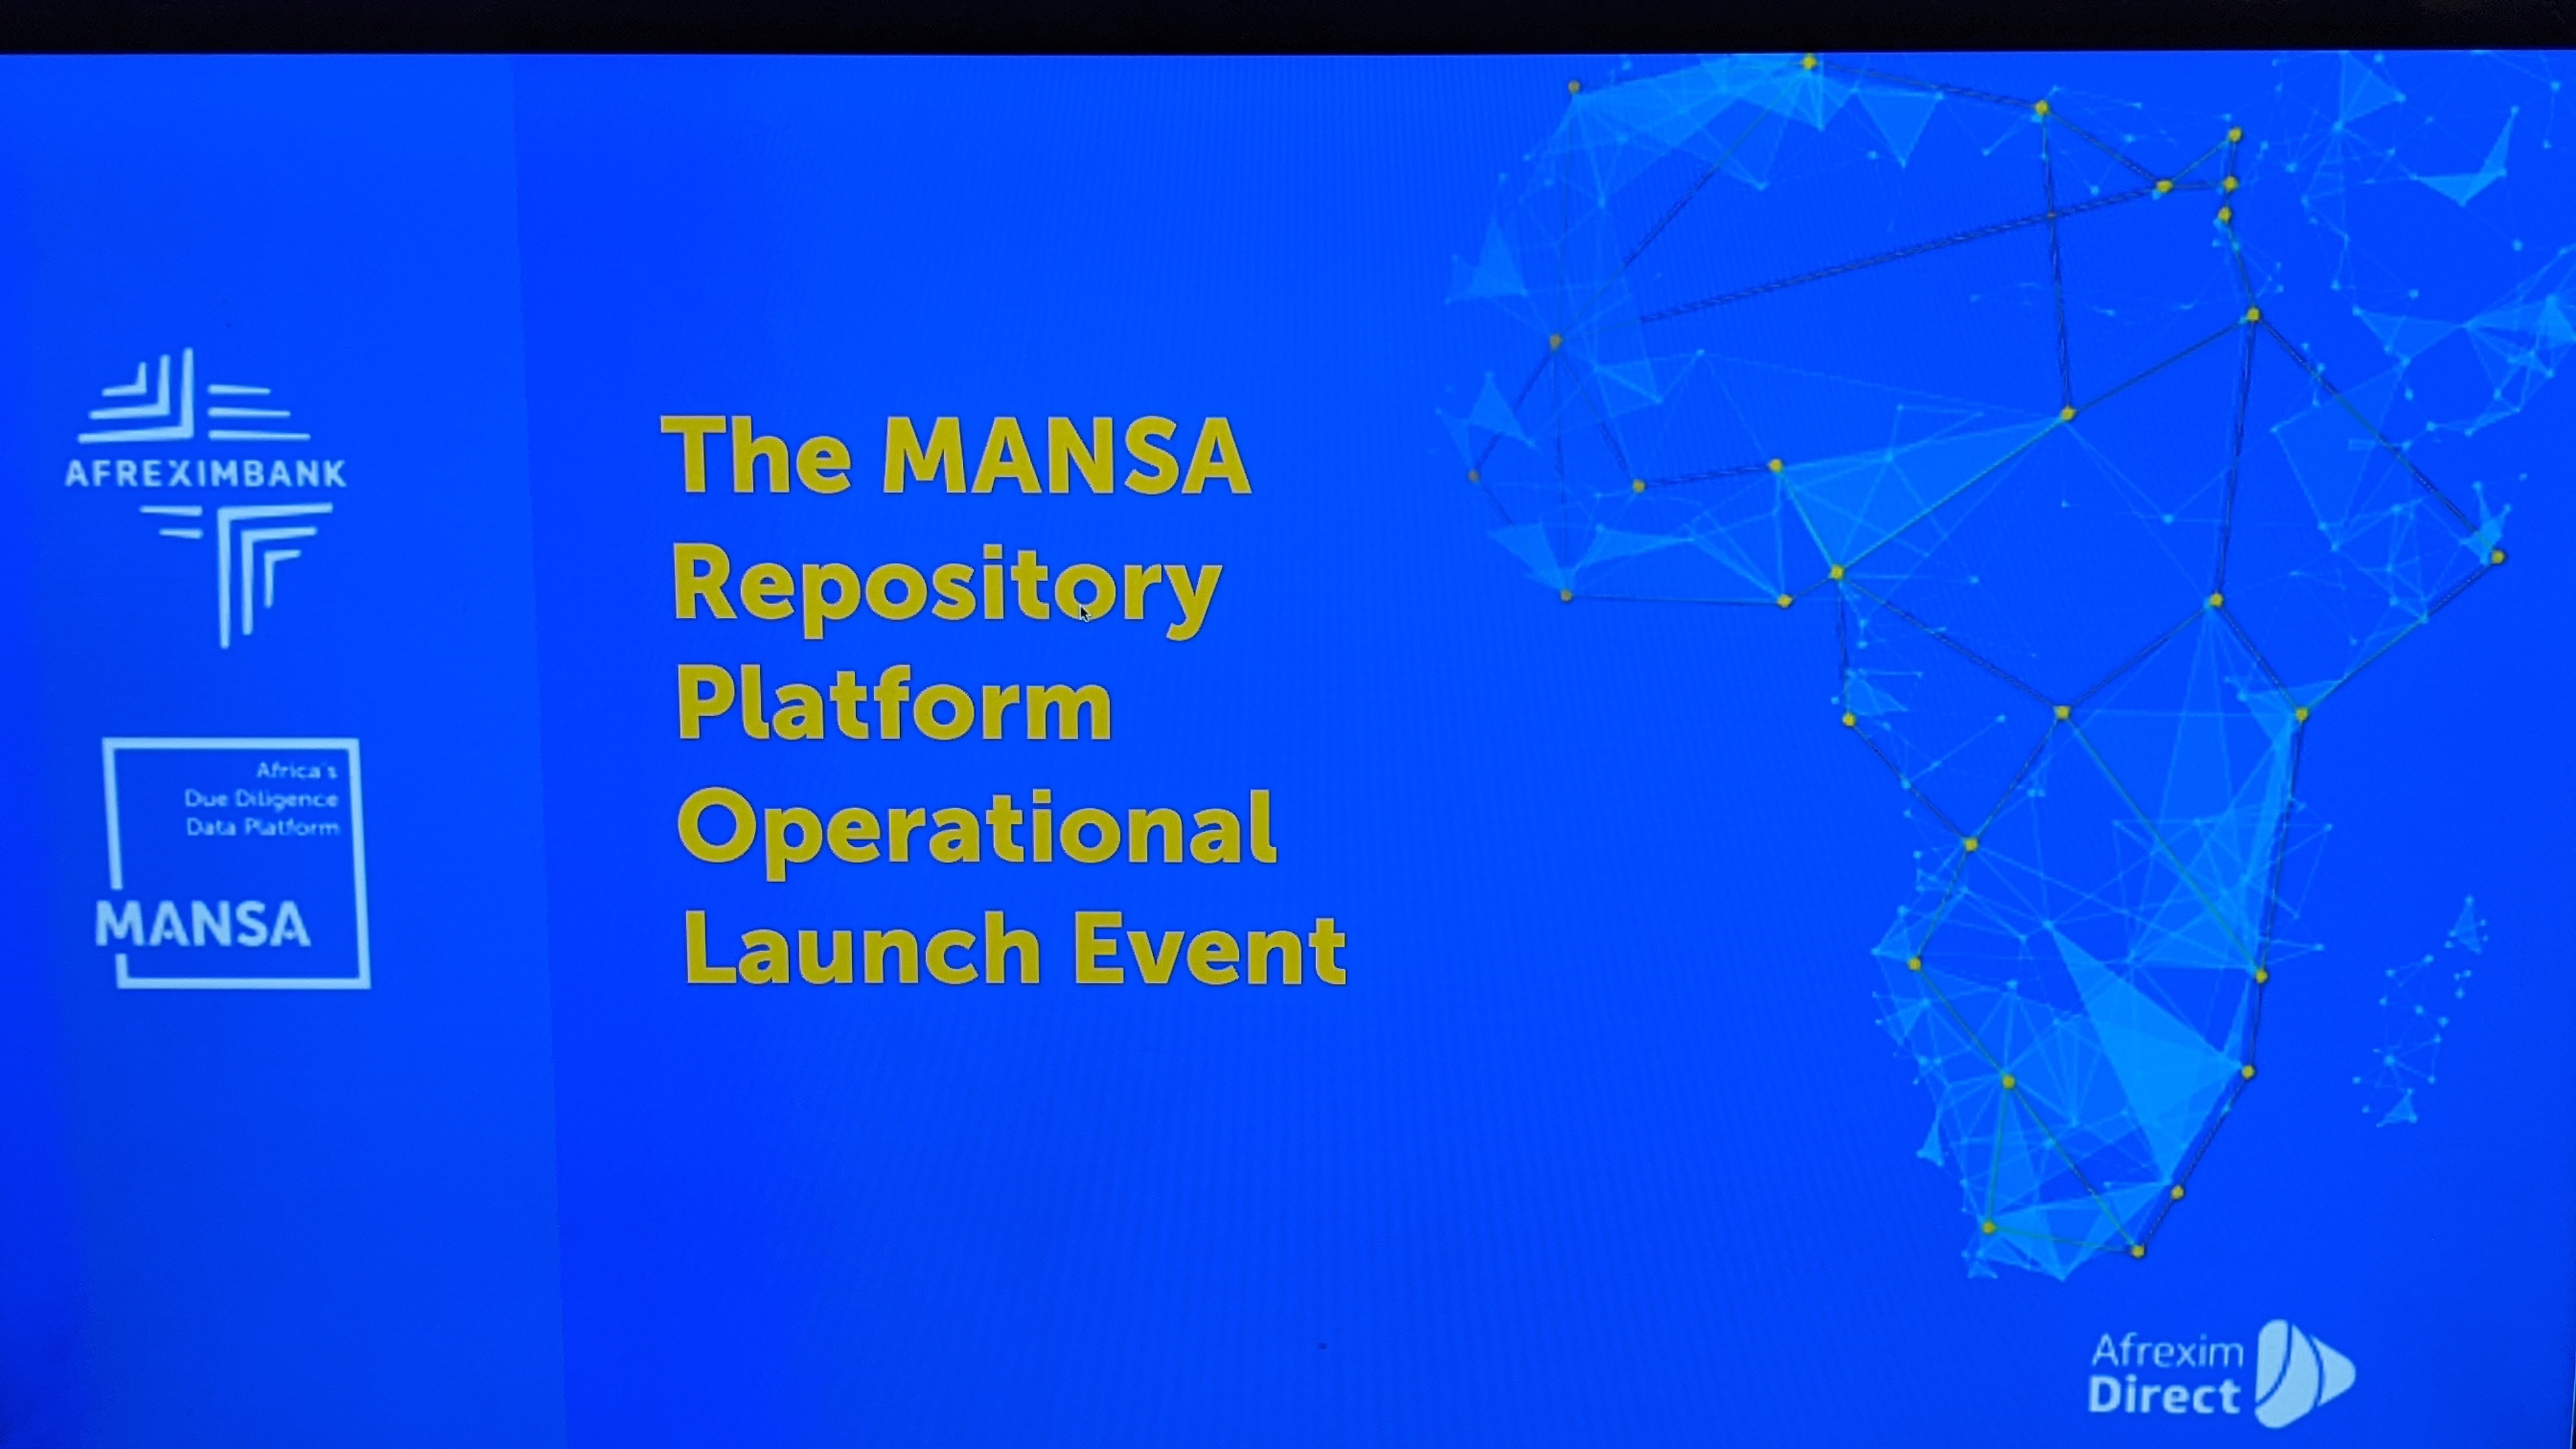 AFREXIMBANK LAUNCHES MANSA, AFRICA’S DIGITAL DUE DILIGENCE REPOSITORY